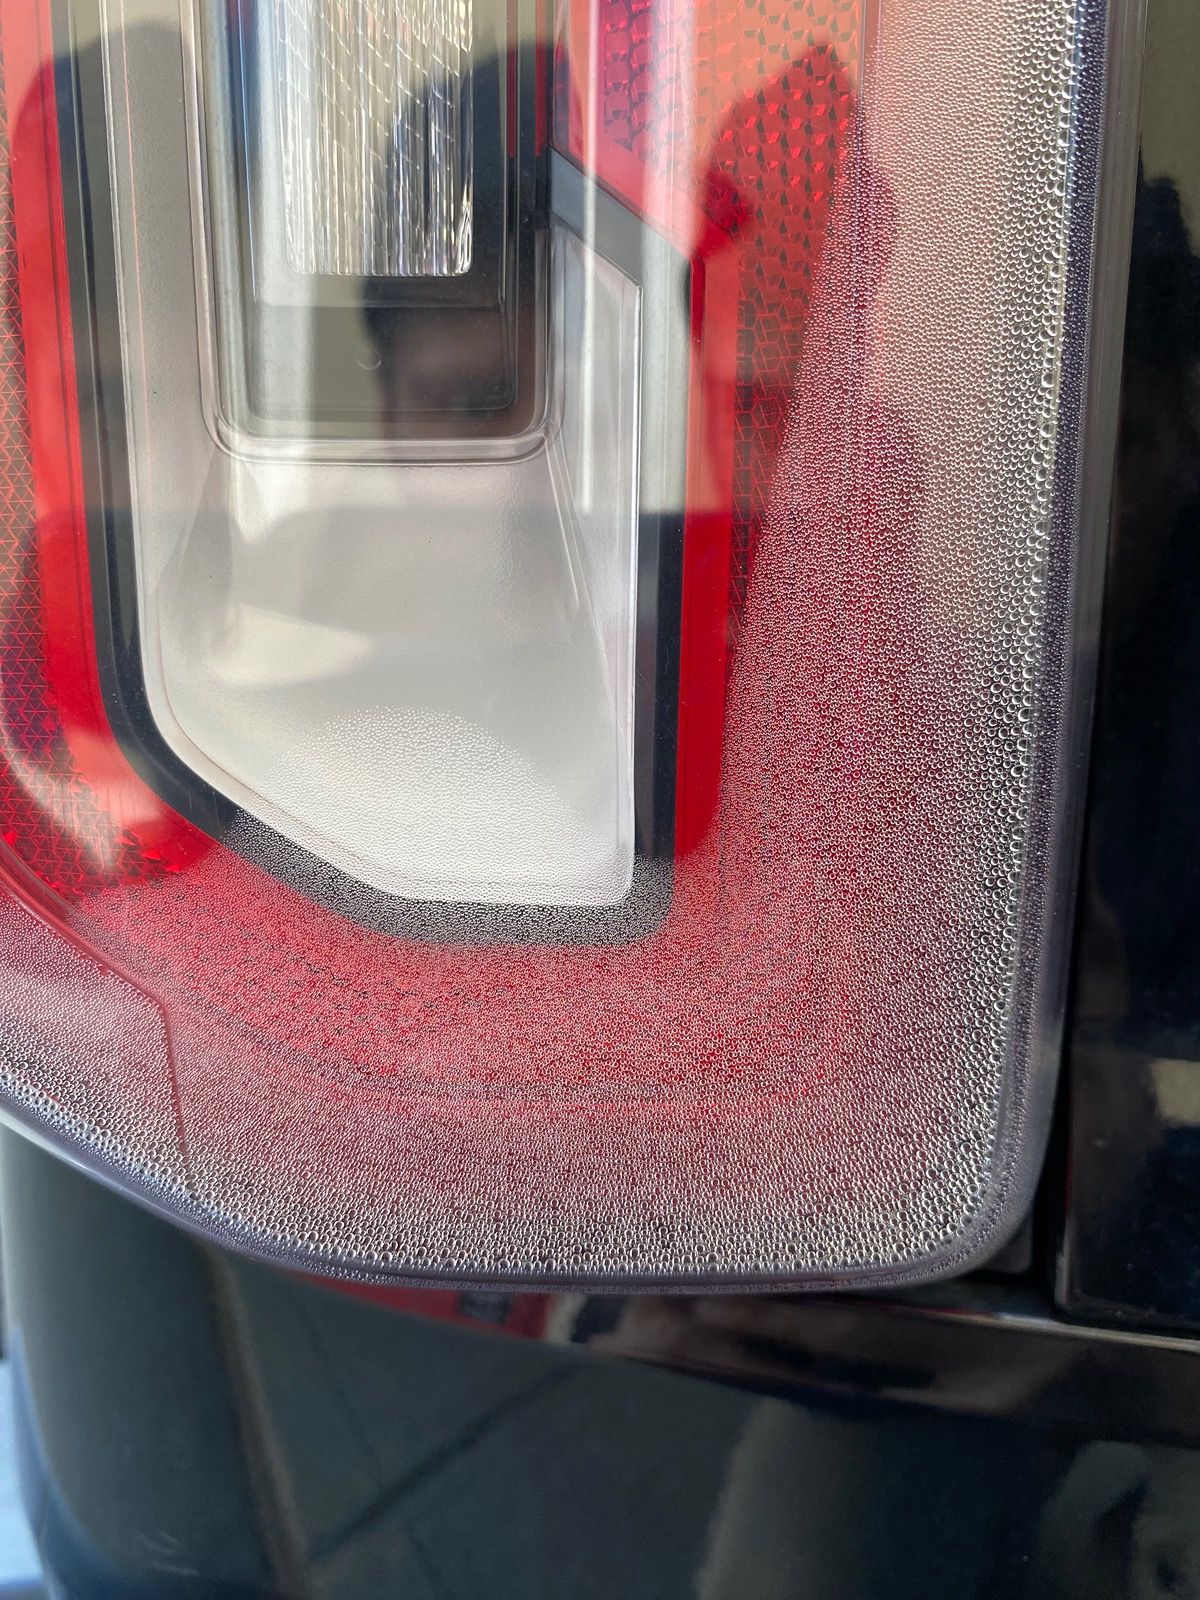 Ford Bronco Water/condensation in rear taillight IMG_3364